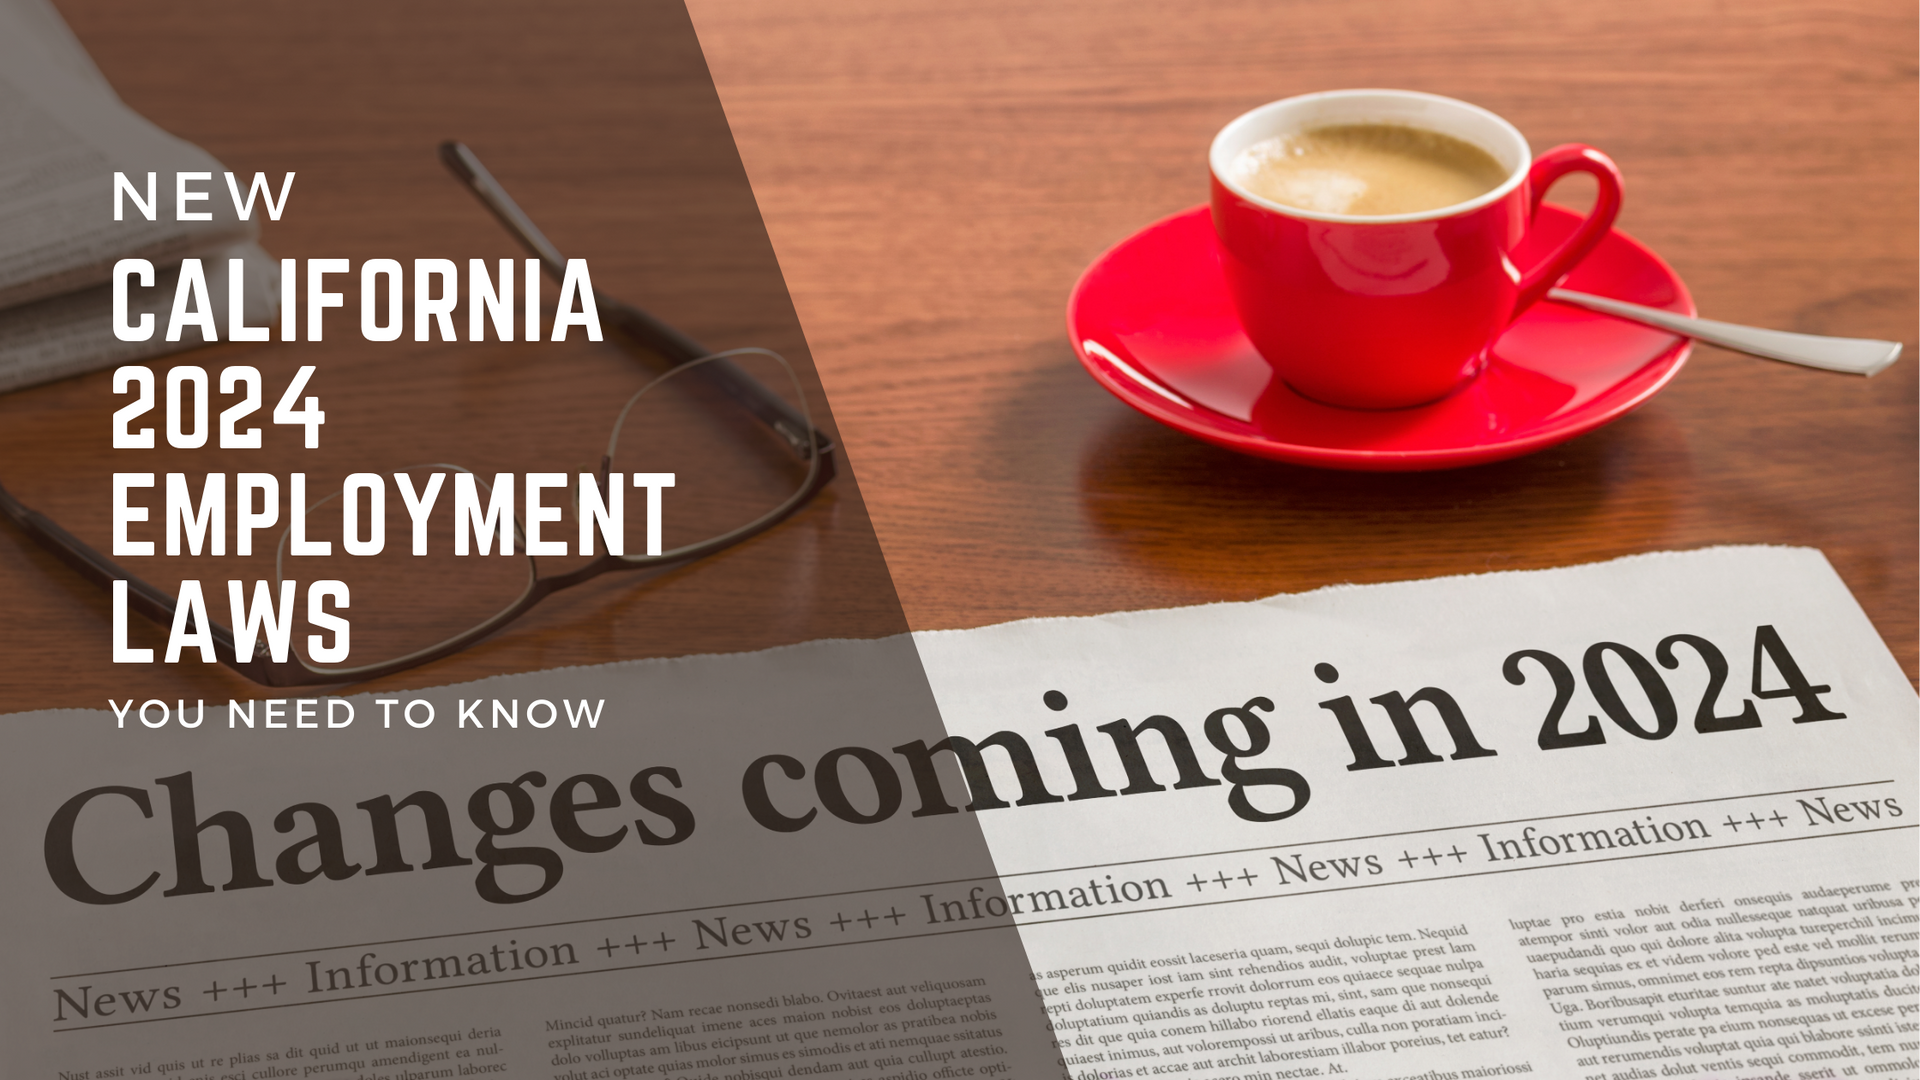 New California 2024 Employment Laws